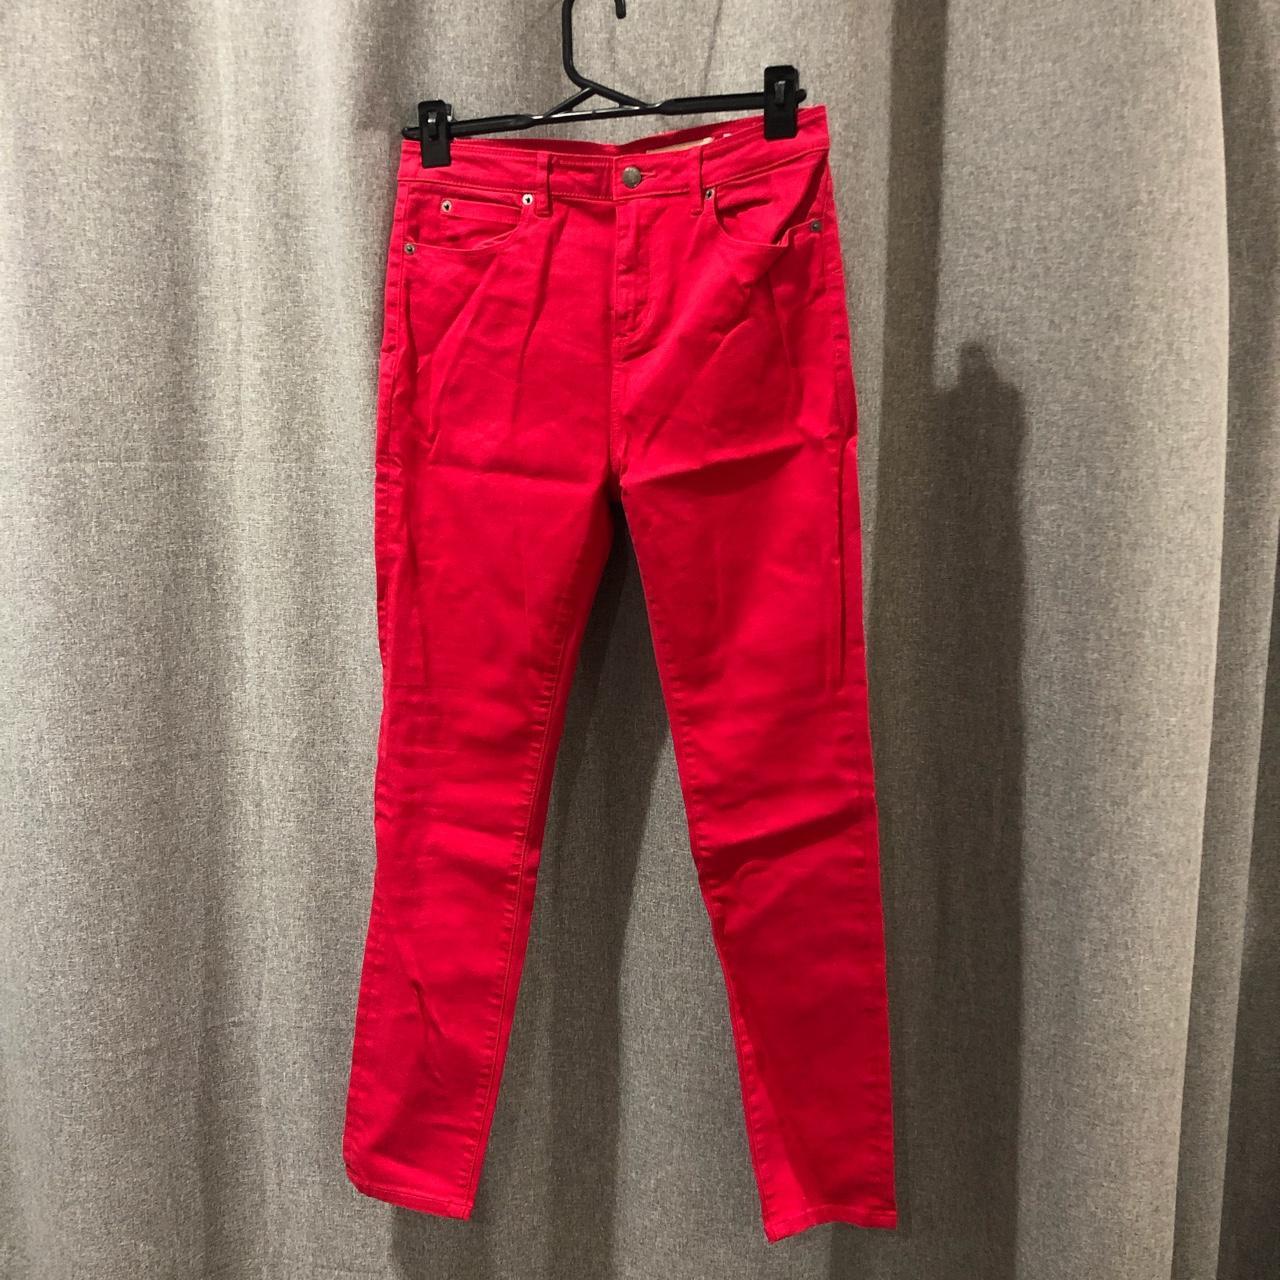 Sass and bide jeans Size 31 Straight leg jeans Red... - Depop